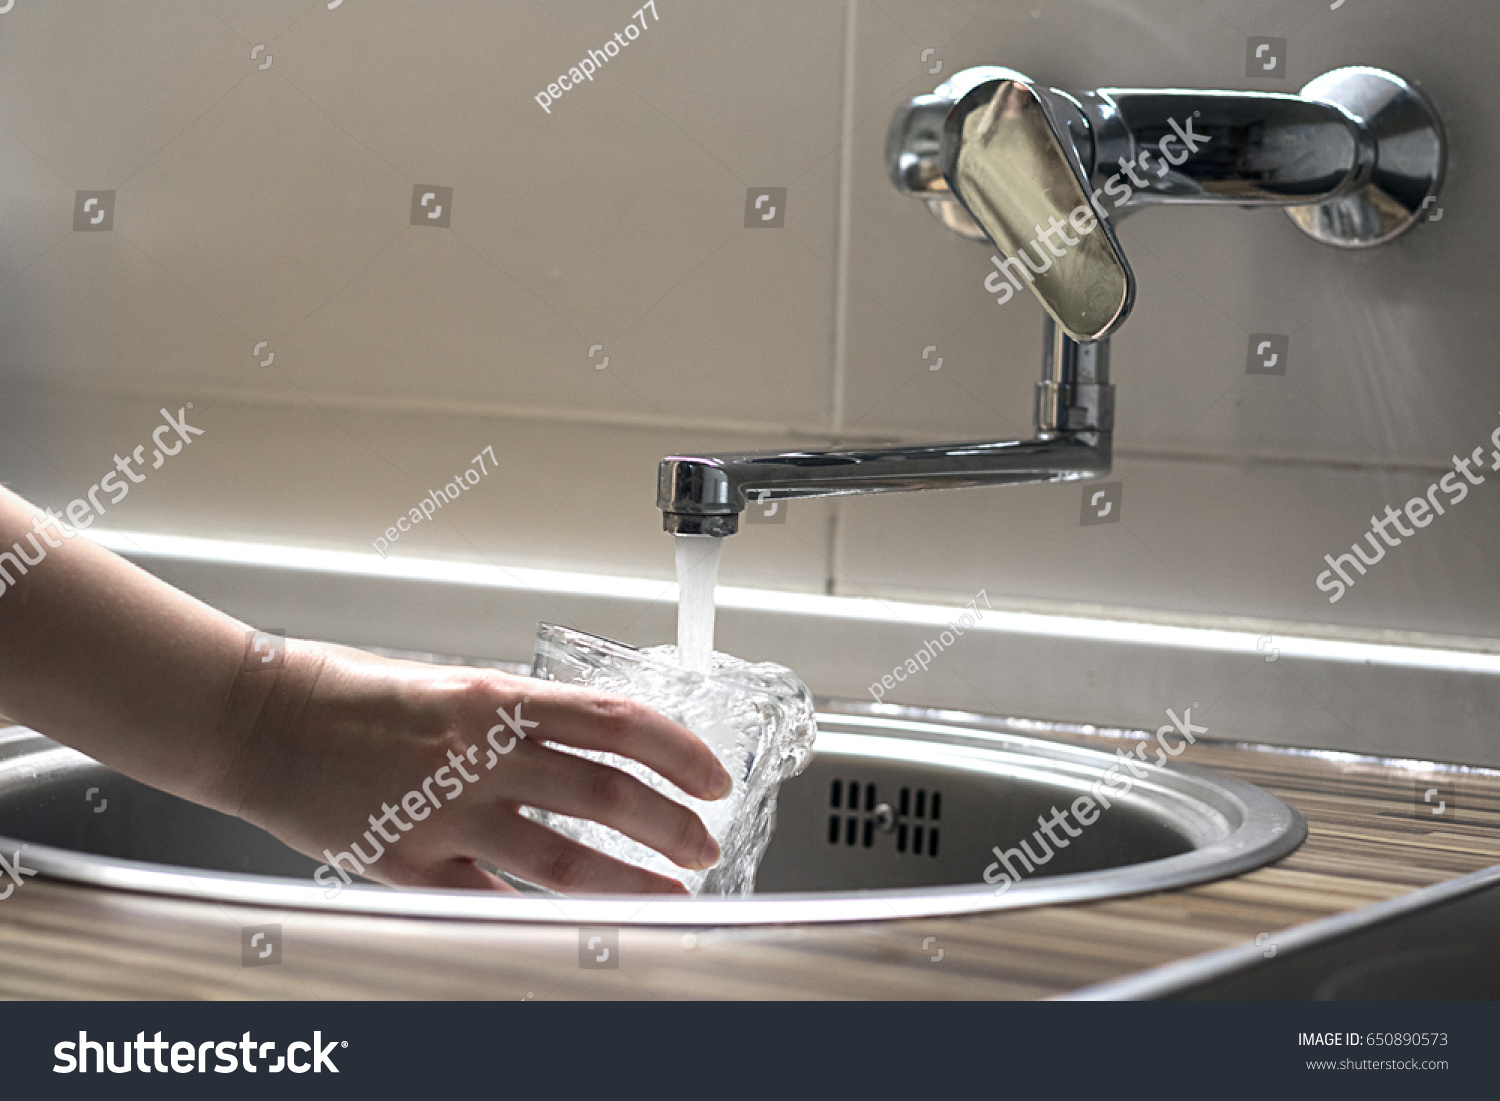 Female Hands Pouring Water Glass Cup Stock Photo 650890573